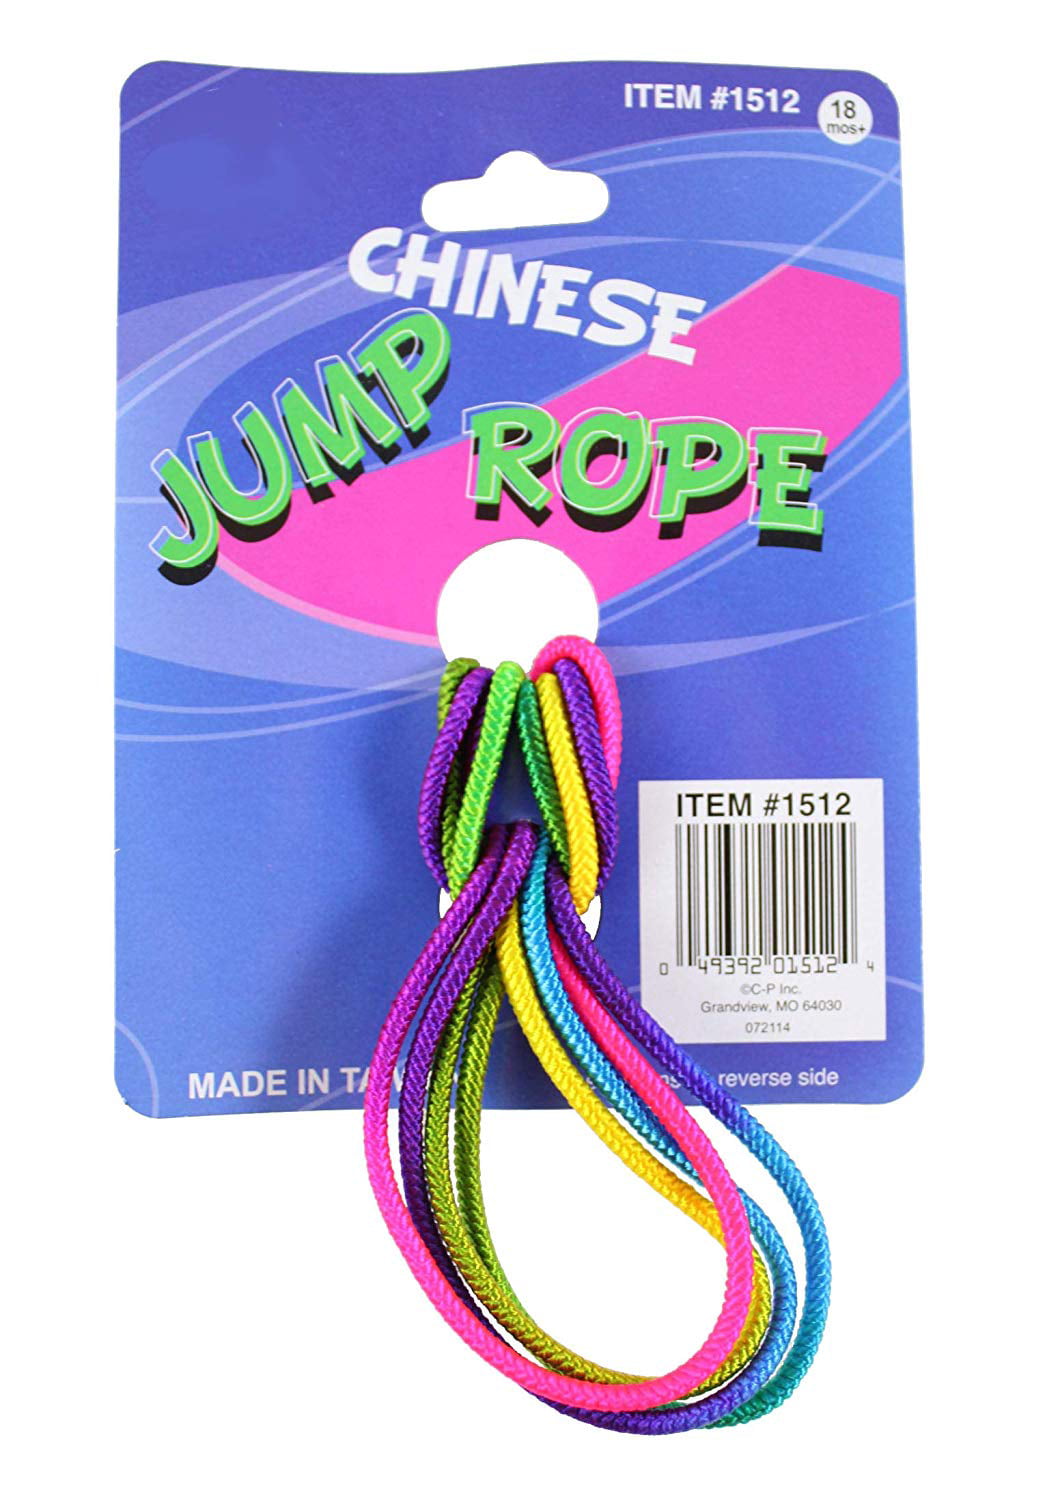 18 NEW CHINESE JUMP ROPES MULTI COLORED NEON ELASTIC JUMP ROPE CLASSIC TOY 